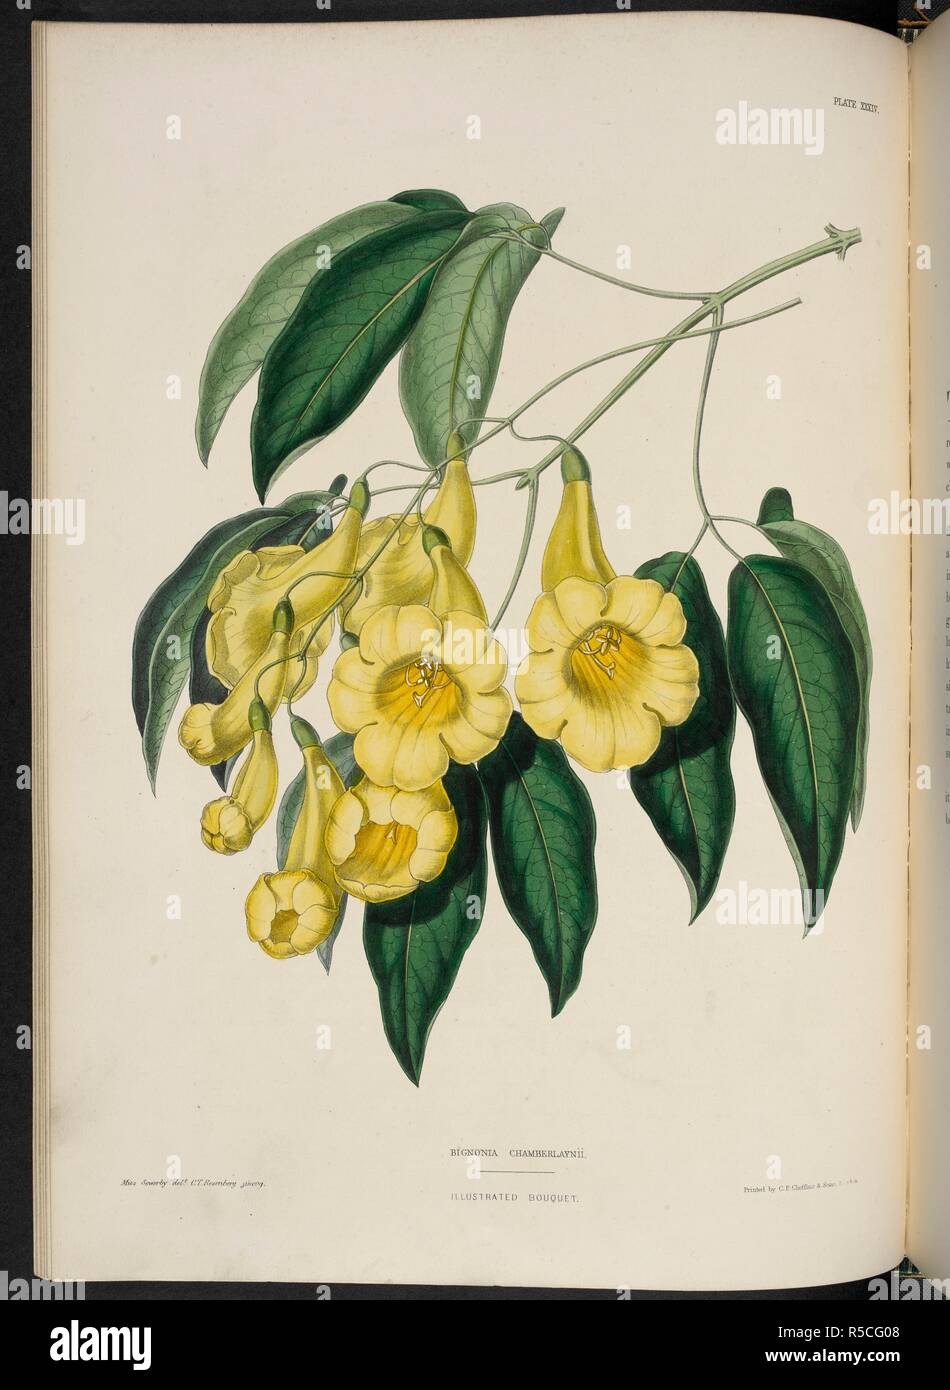 Bignonia chamberlaynii. Bignonia is a genus of flowering plants in the catalpa family, Bignoniaceae. . The Illustrated Bouquet, consisting of figures, with descriptions of new flowers. London, 1857-64. Source: 1823.c.13 plate 34. Author: Henderson, Edward George. Sowerby, Miss. Stock Photo